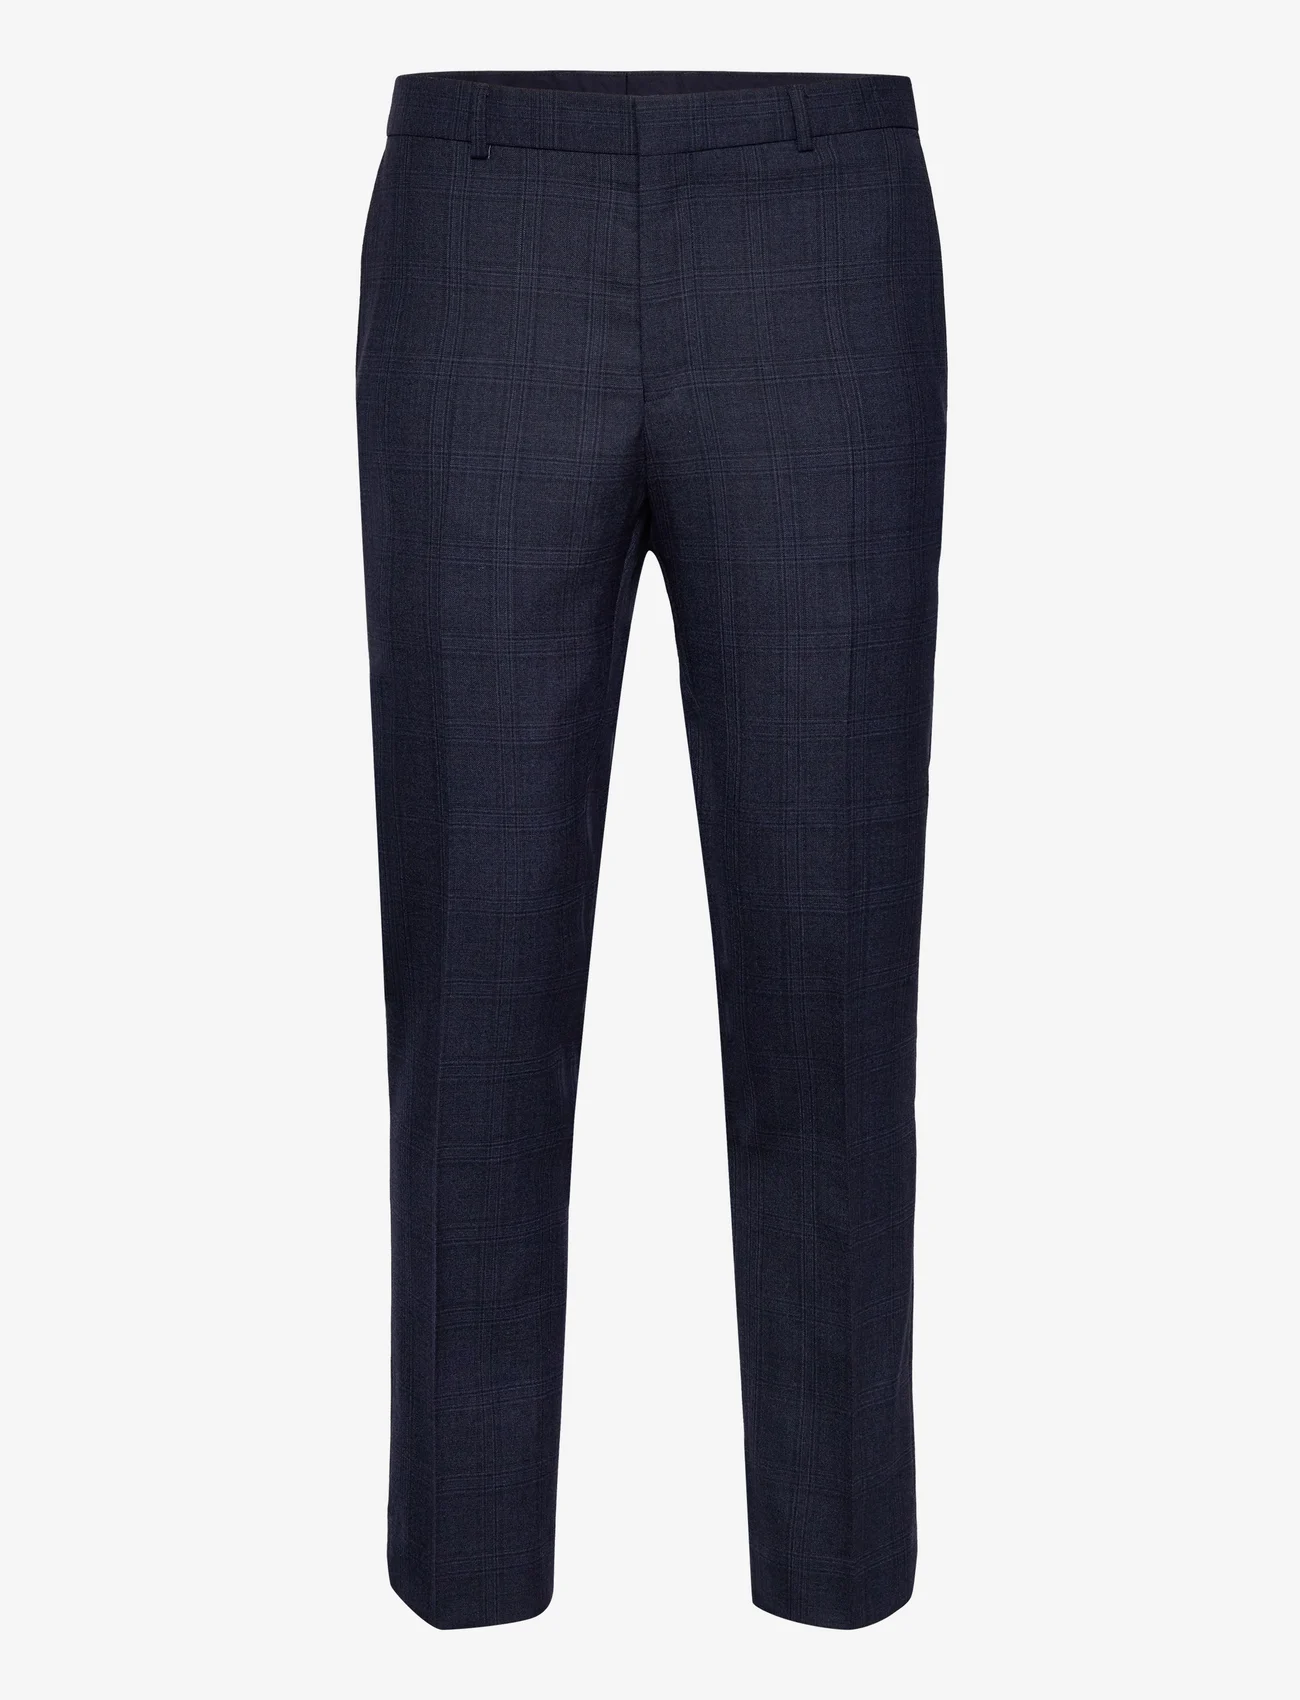 Ted Baker London - ARA - suit trousers - 10 navy - 0